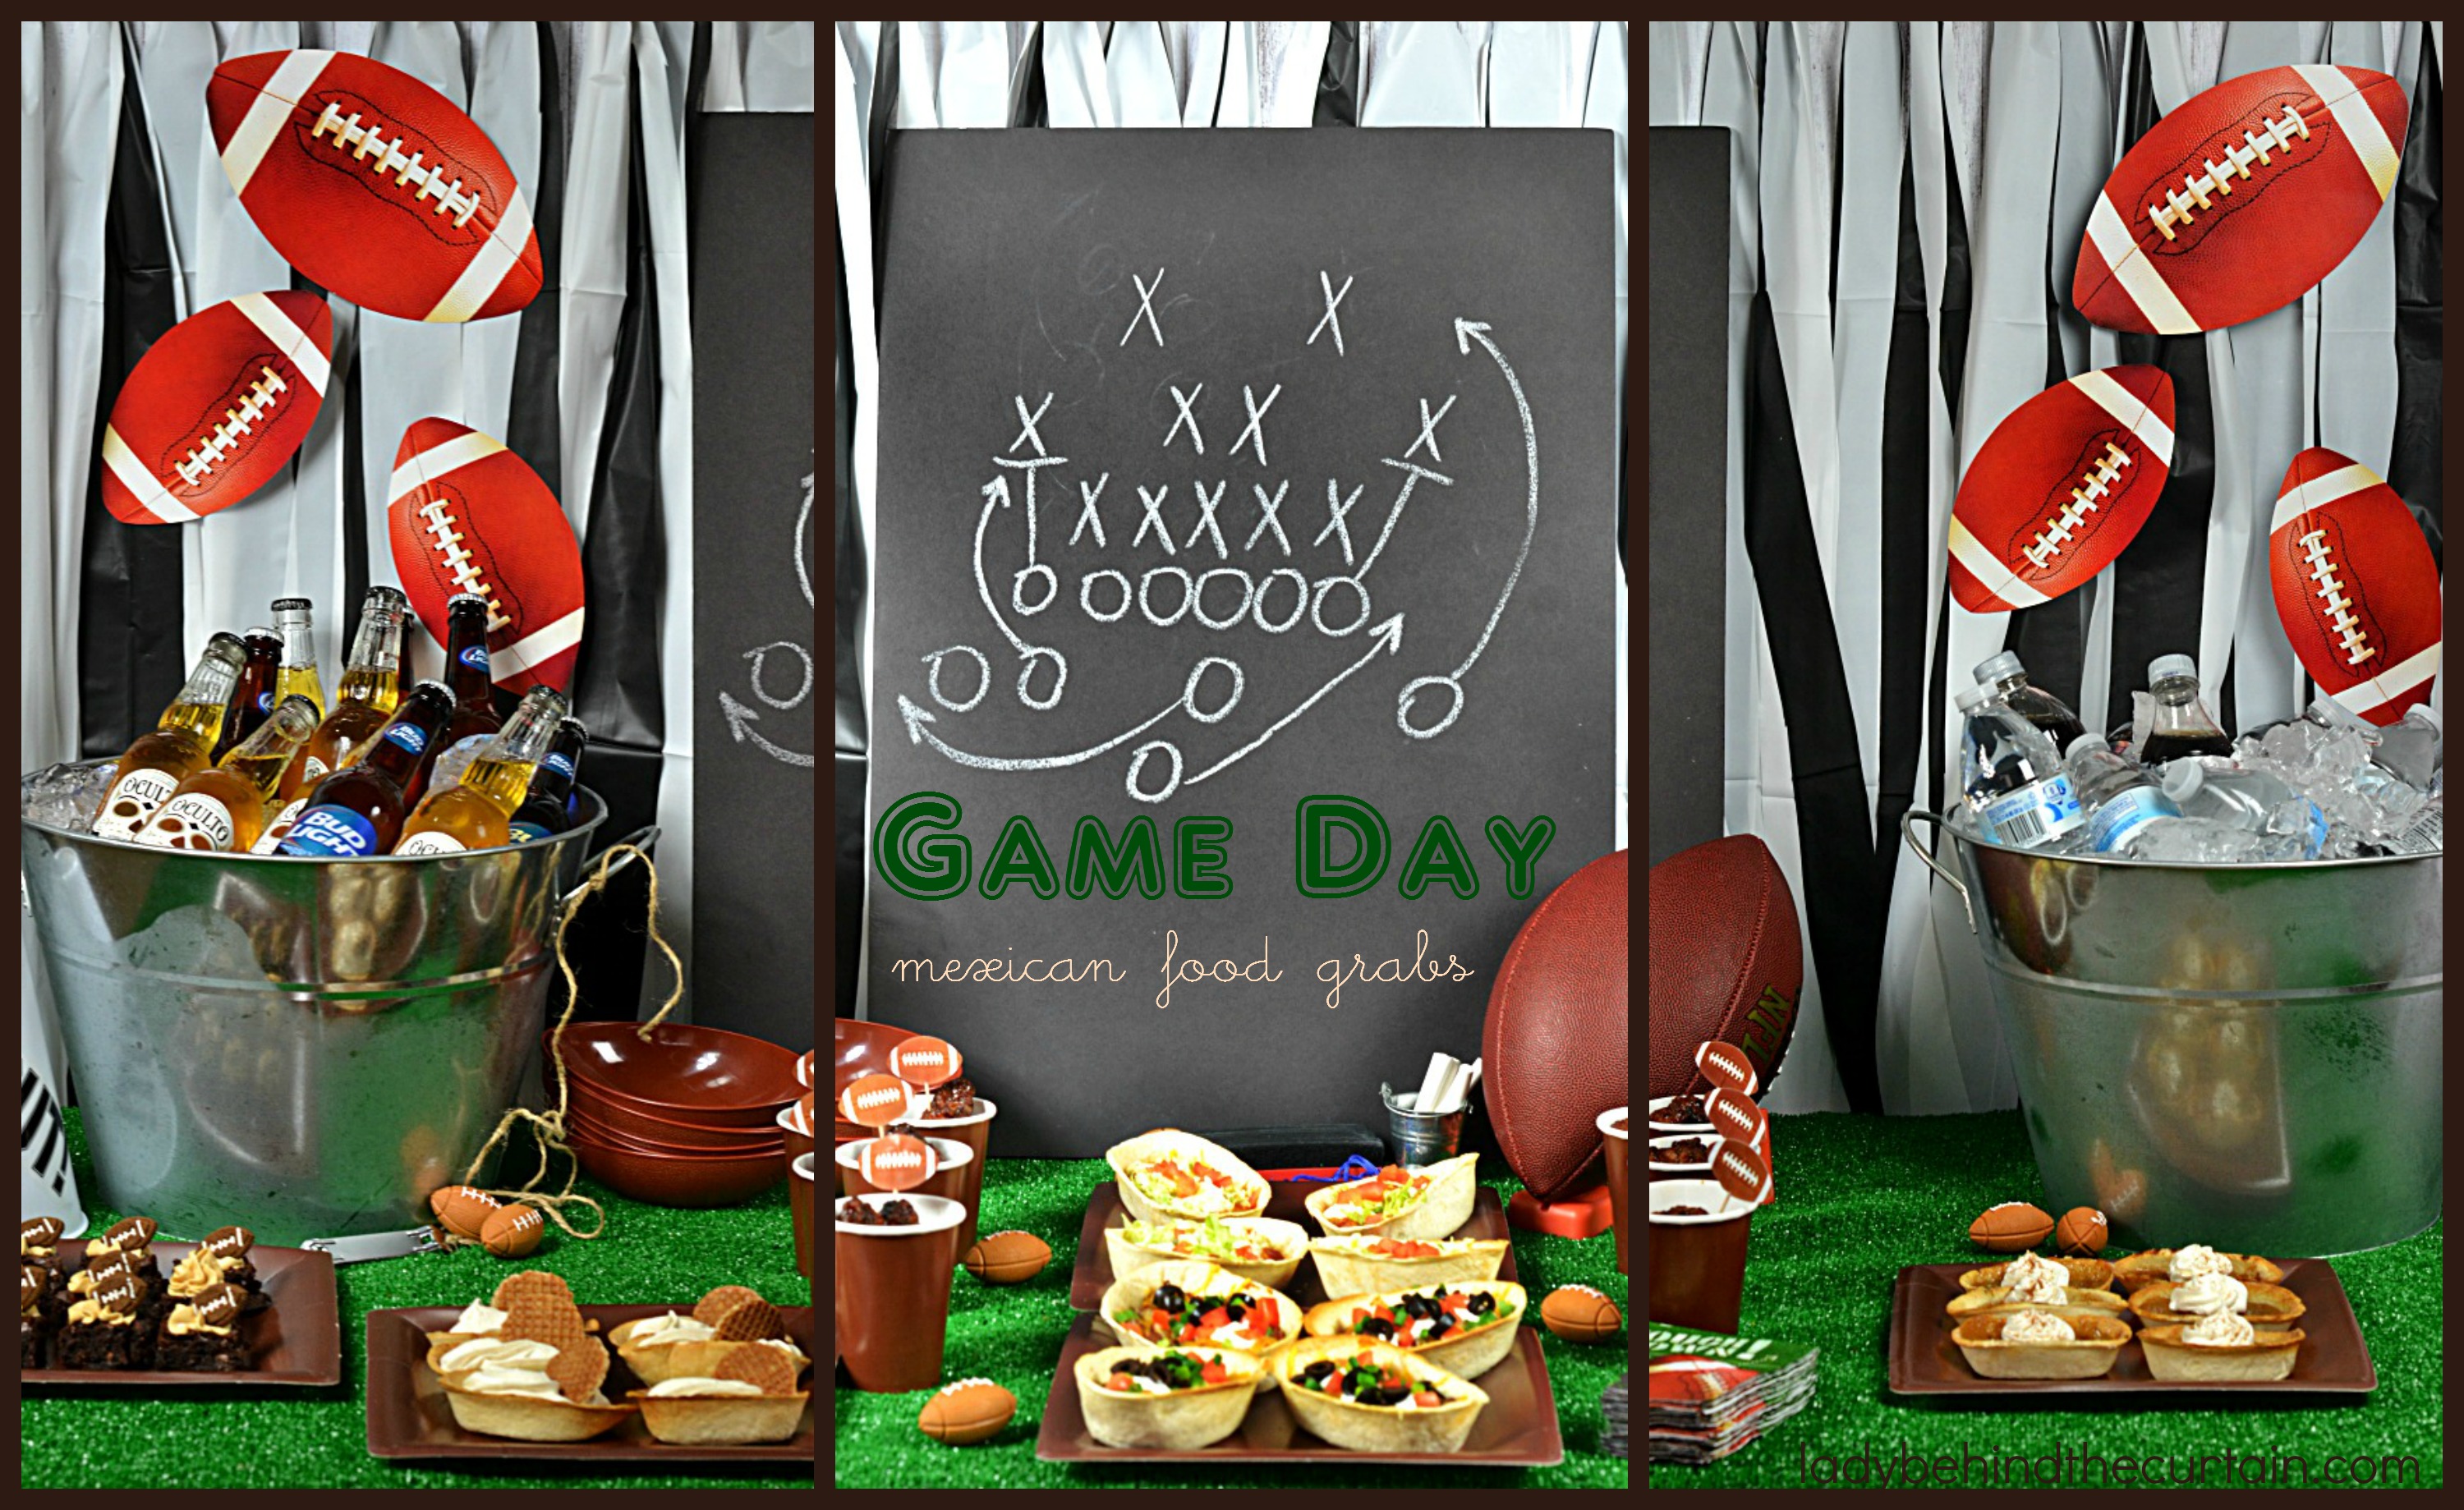 Game Day Mexican Food Grabs | Oh my gosh! Is there anything better then game day food? It's the one time all your favorite foods are on one table in mini form so you can HAVE THEM ALL! 